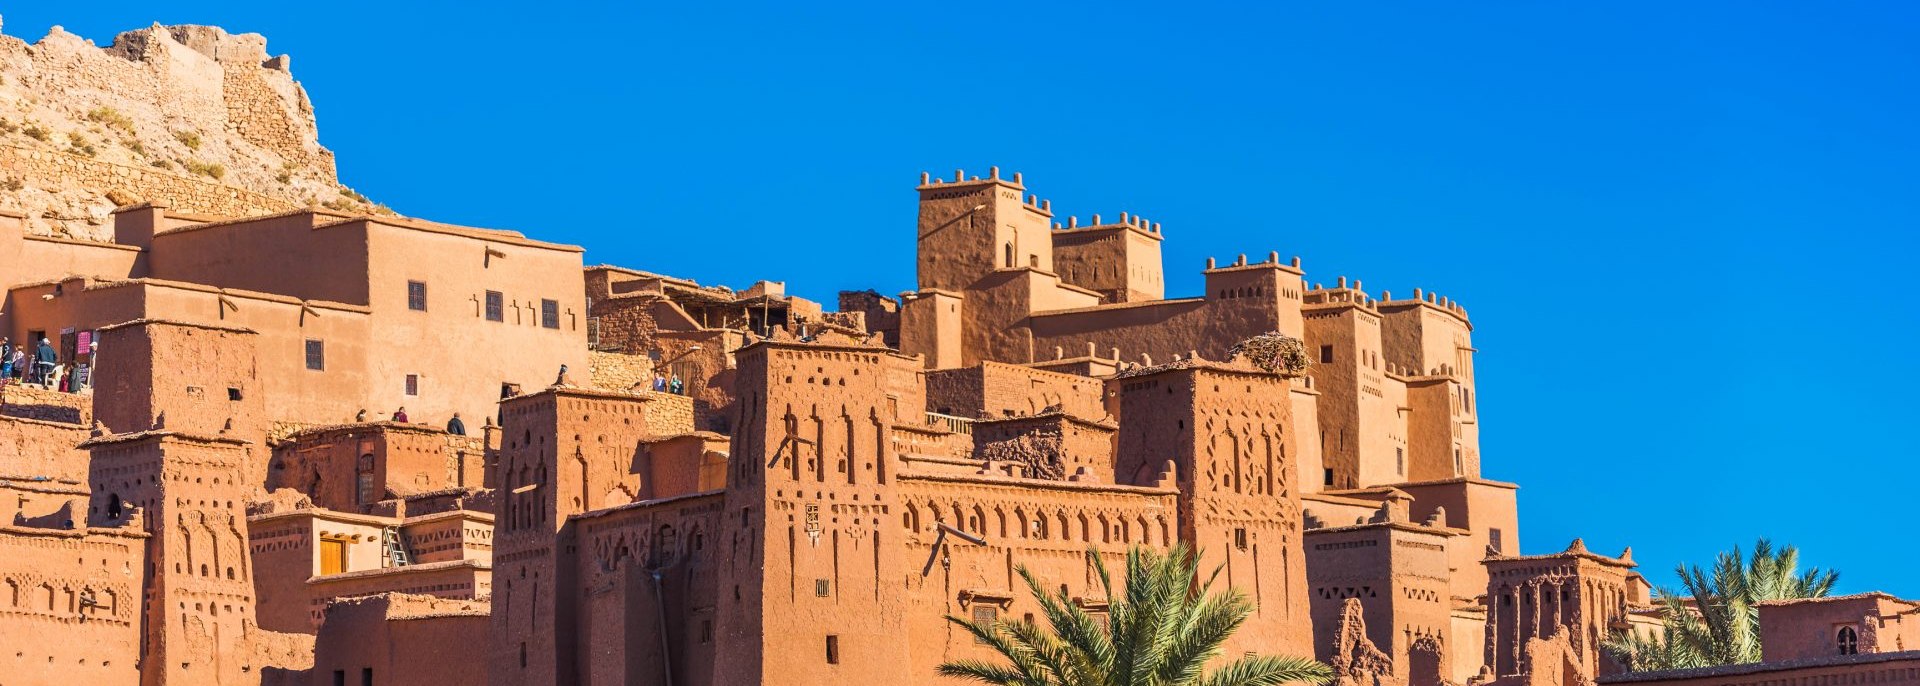 A complex of rosy-tan buildings called a kasbah, with palm trees.